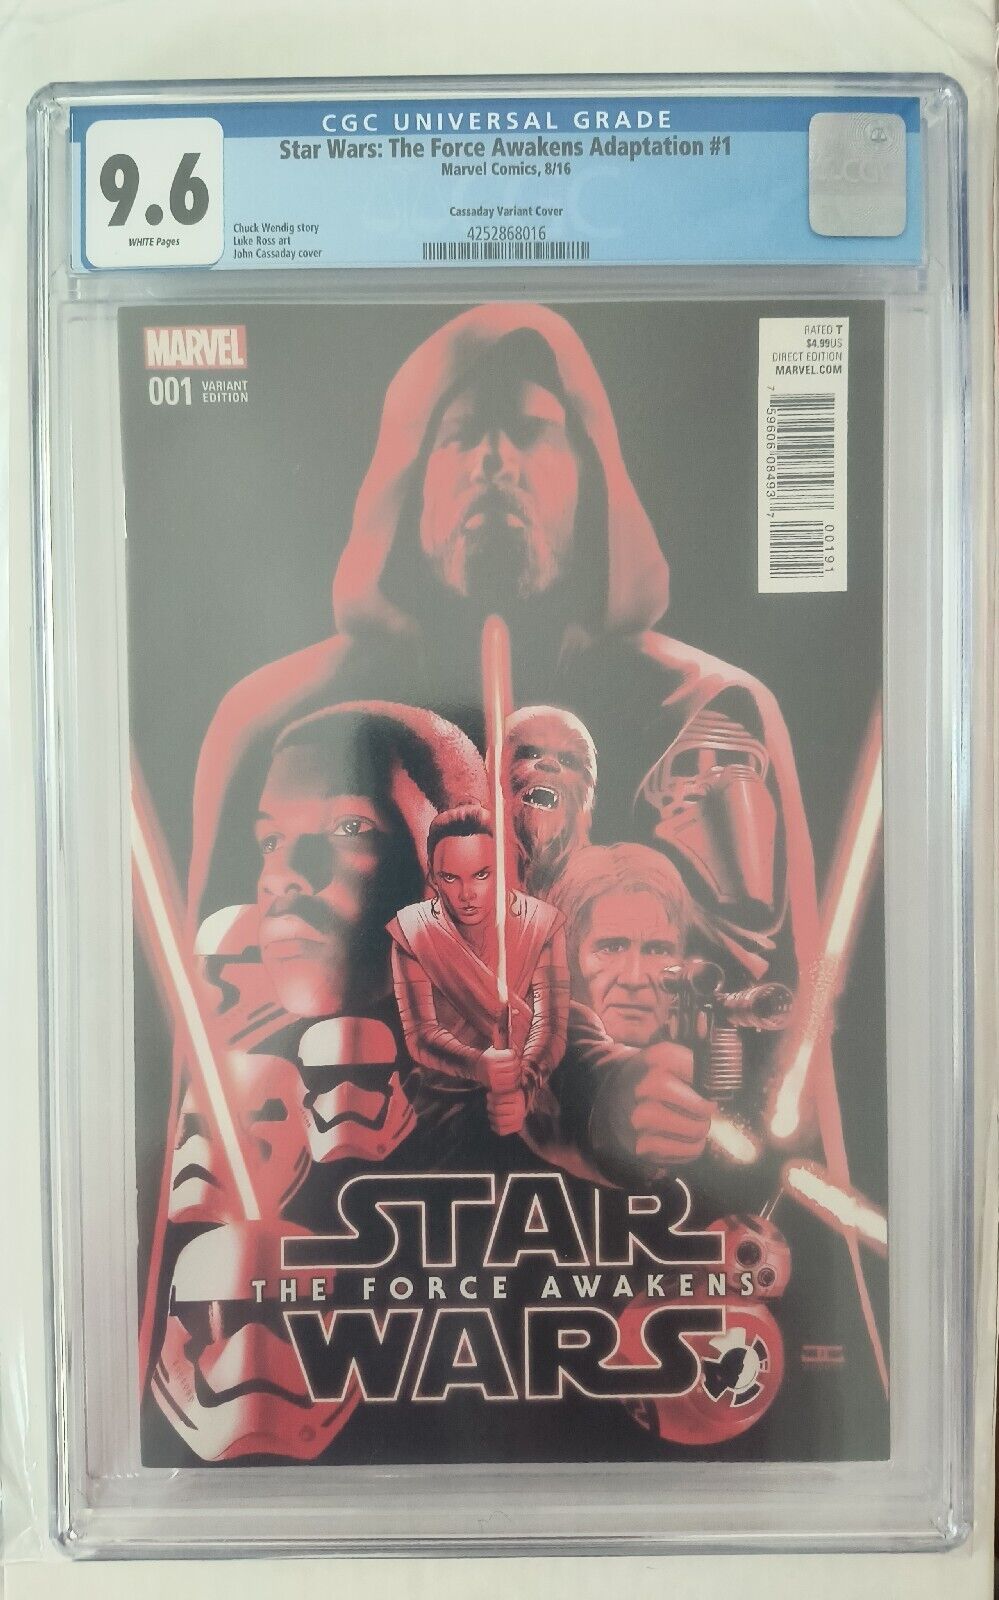 Star Wars: The Force Awakens #1 (CGC 9.6) 1:50 Cassaday variant Recently graded